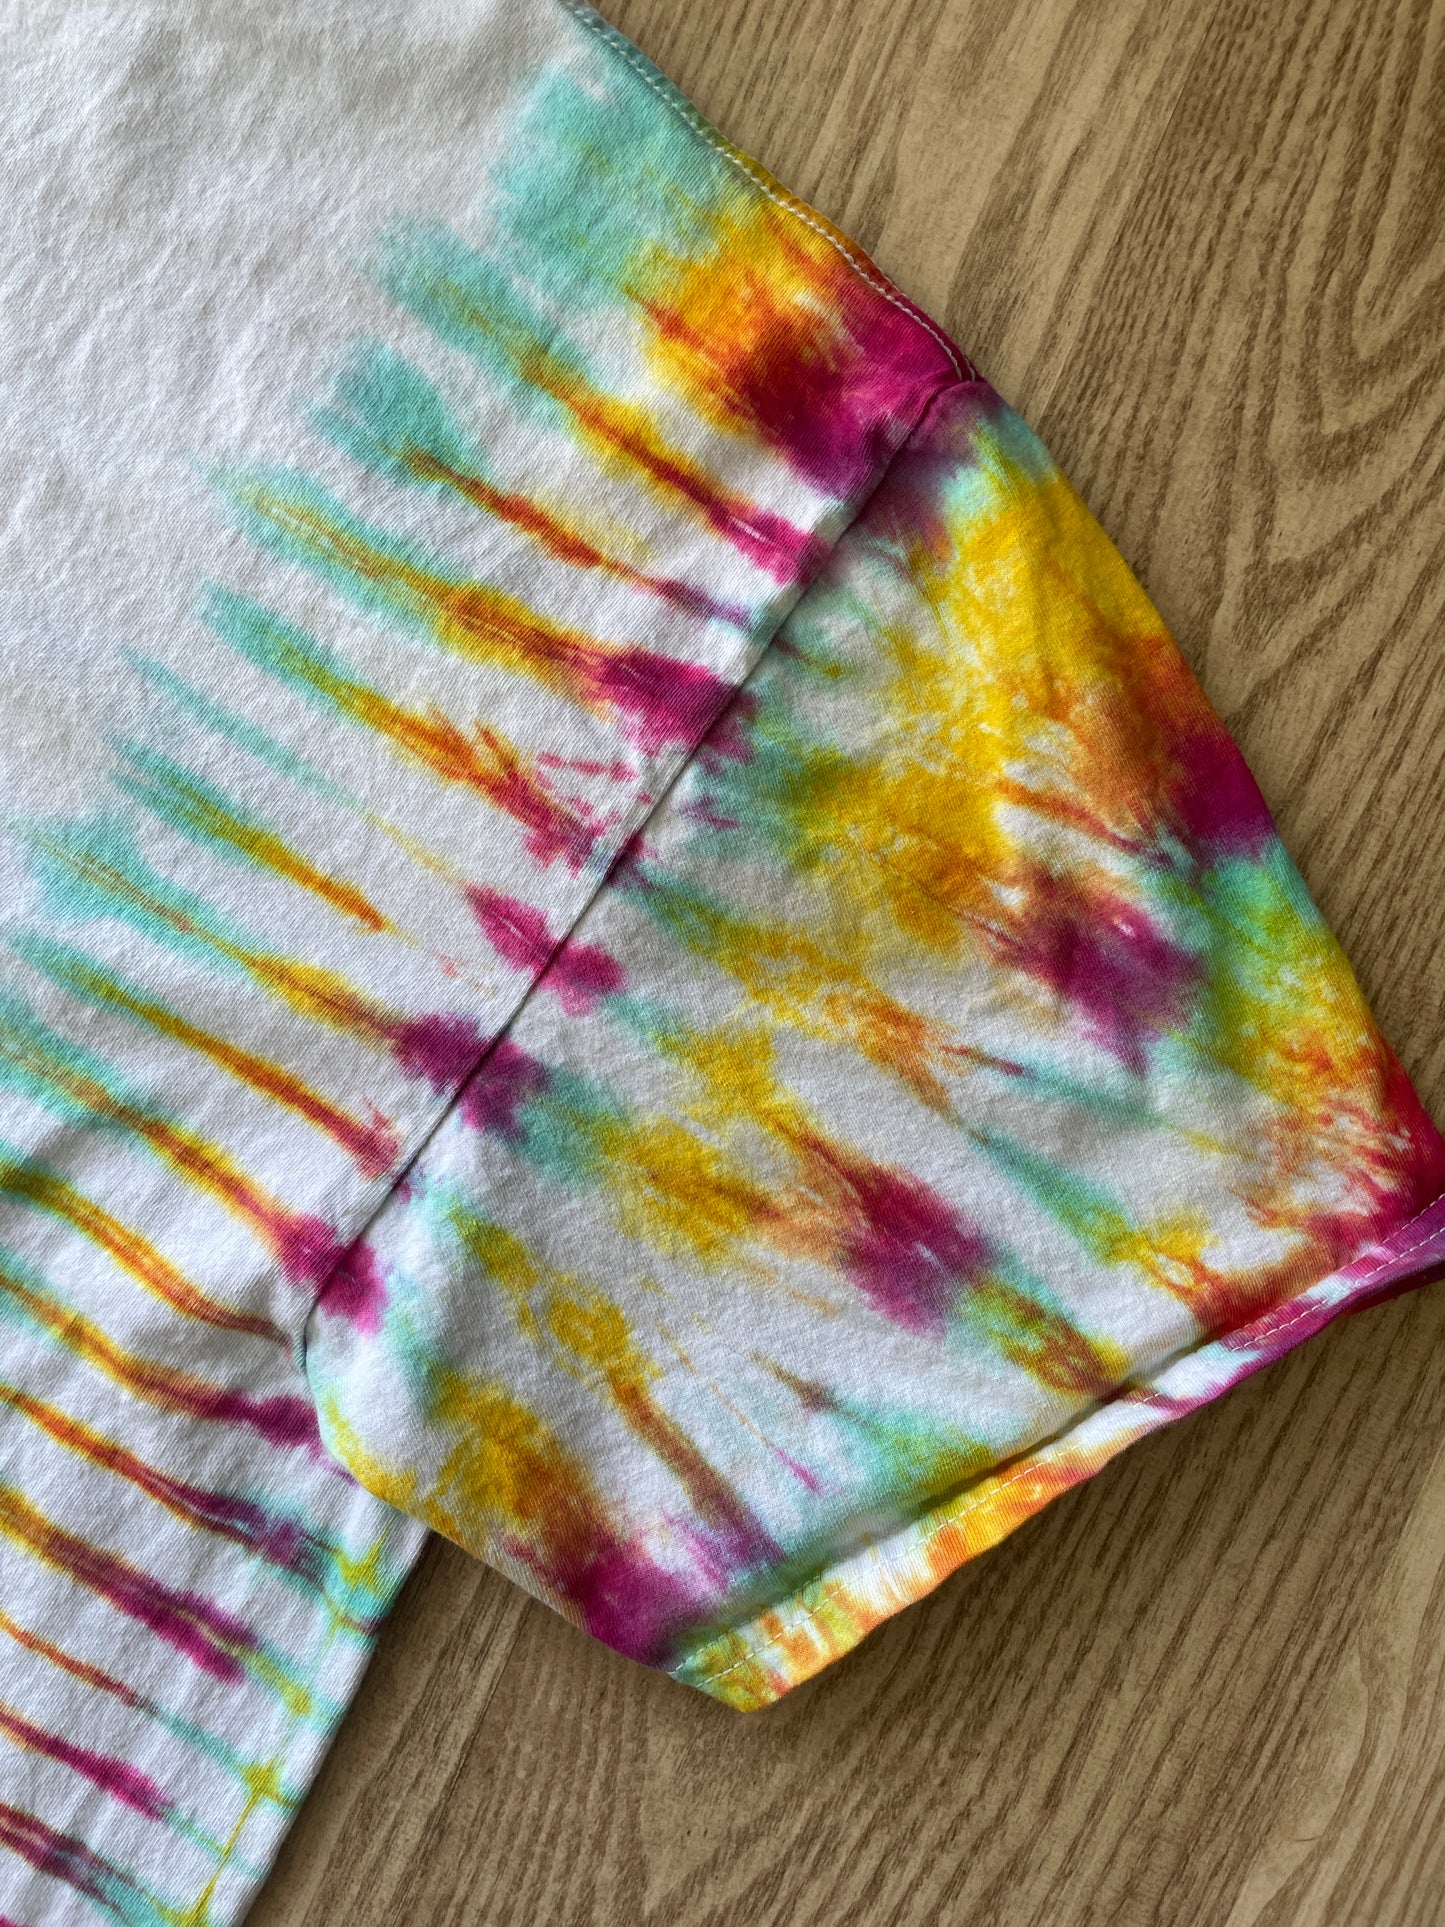 LARGE Men’s Manifest Your Vision Handmade Tie Dye T-Shirt | One-Of-a-Kind White and Pastel Multicolored Short Sleeve